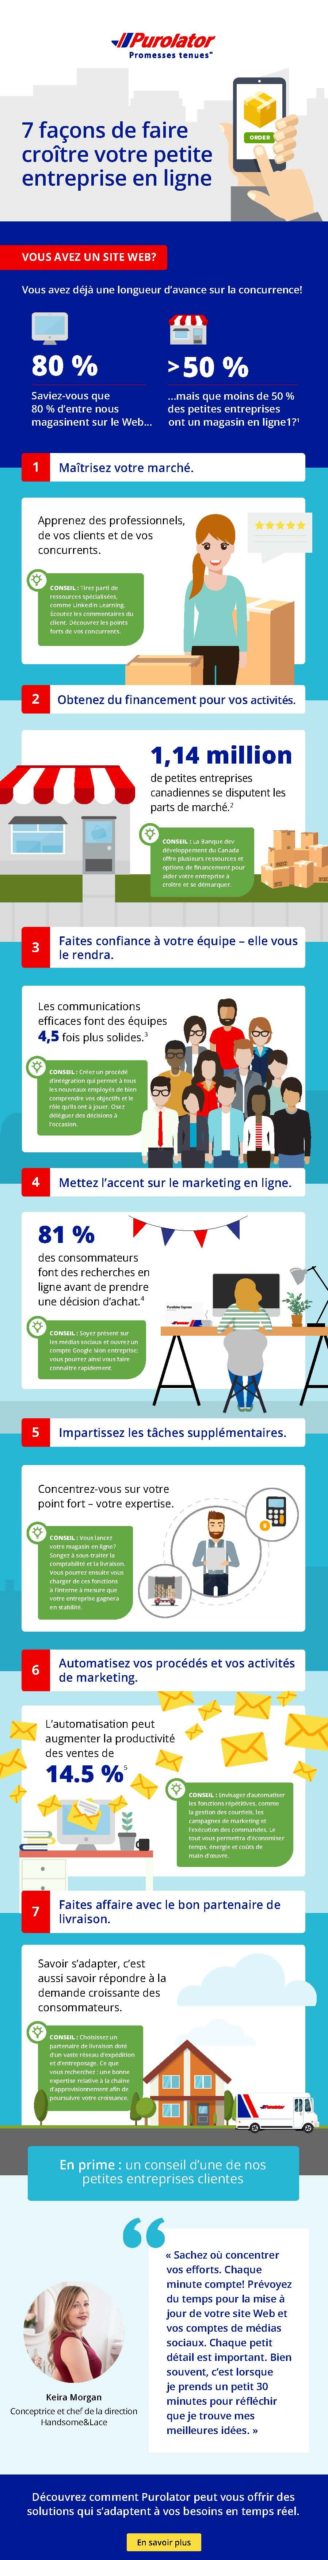 Purolator 7 ways to scale your small business infographic-2020-FR